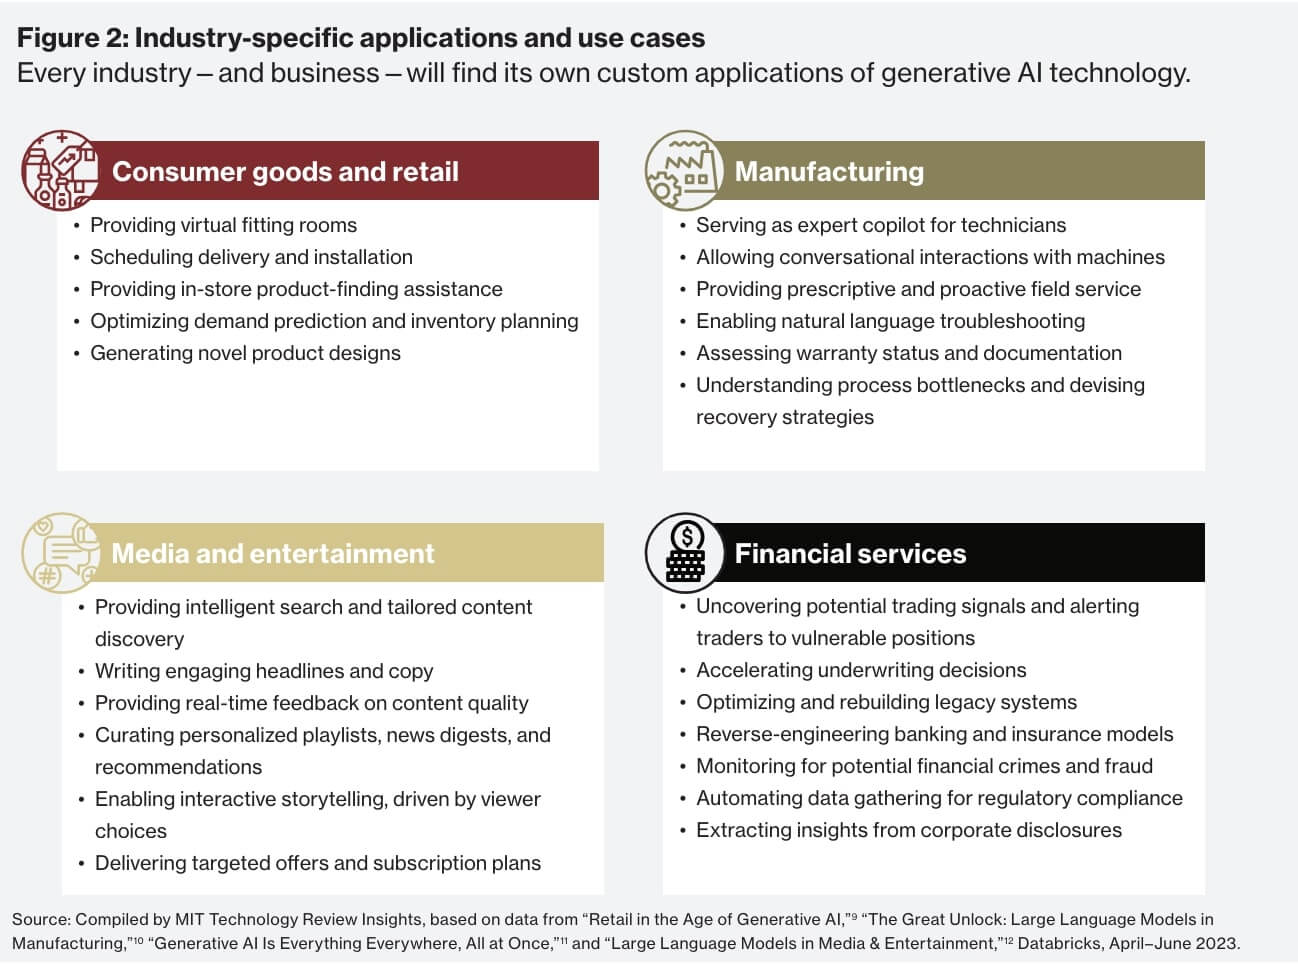 Industry-specific applications and use cases - Source: Compiled by MIT Technology Review Insights